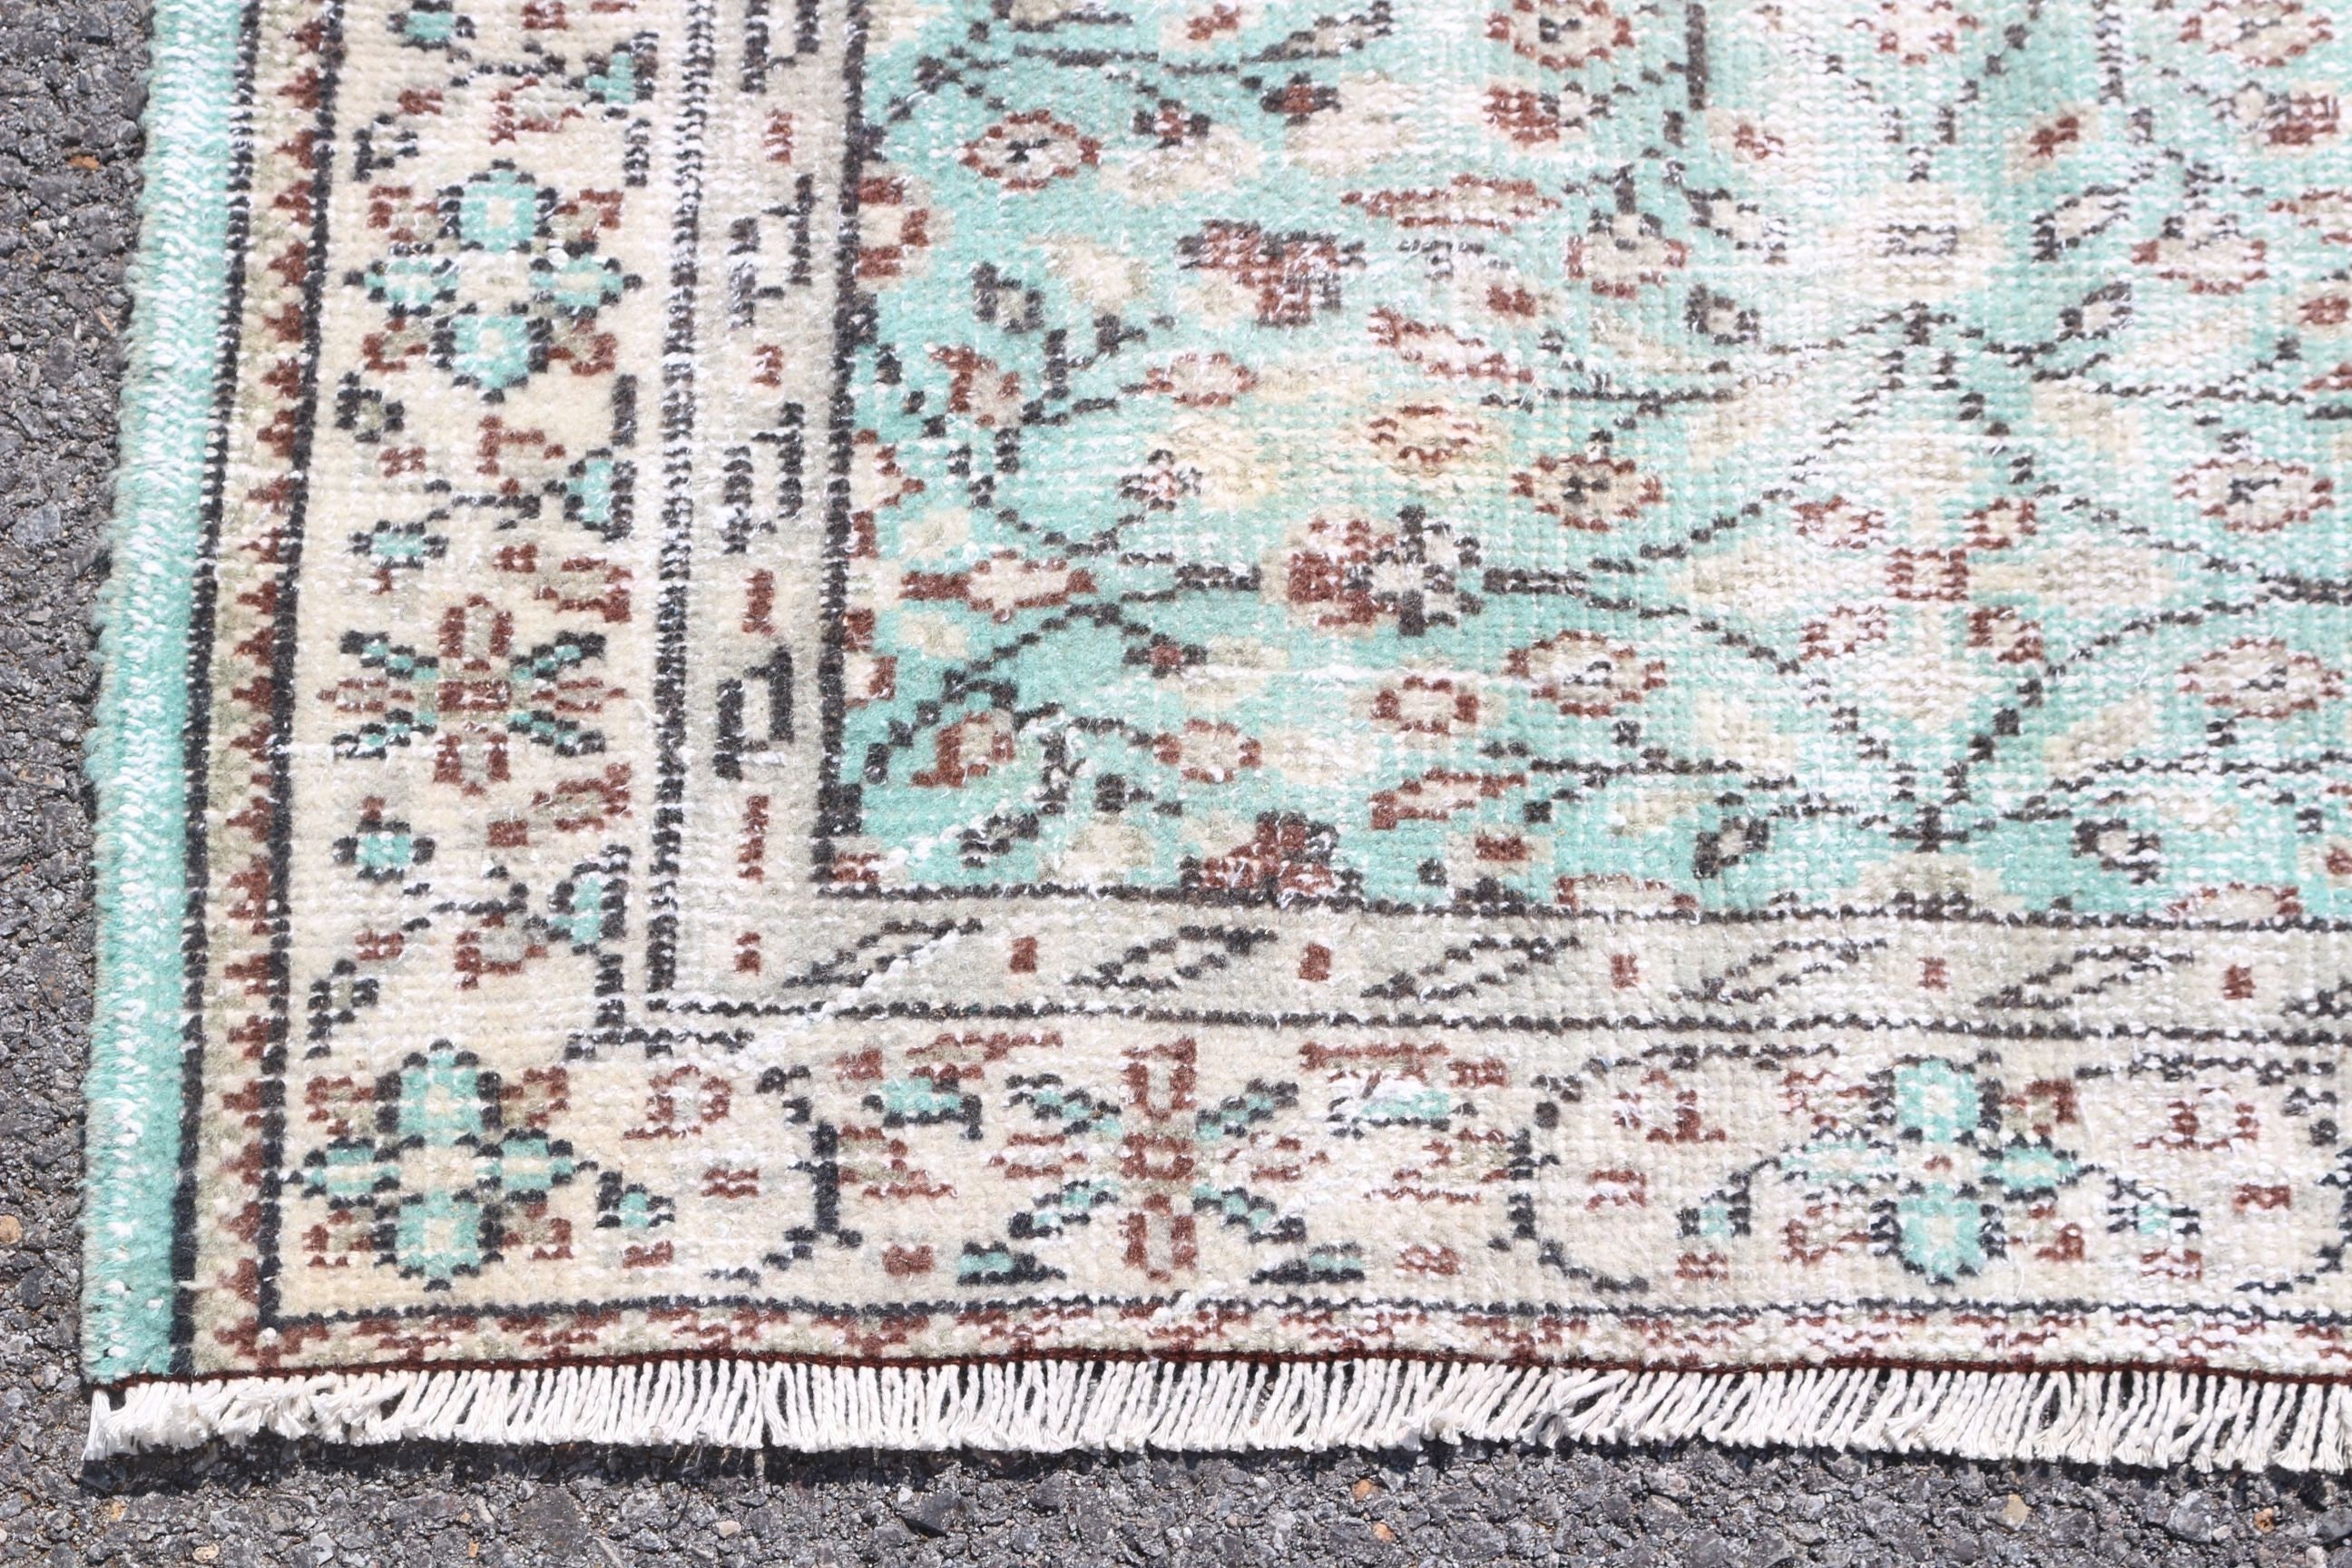 Entry Rug, Turkish Rugs, Nursery Rug, Beige Home Decor Rugs, Kitchen Rug, Bohemian Rug, Vintage Rug, Antique Rugs, 3.1x6.6 ft Accent Rugs